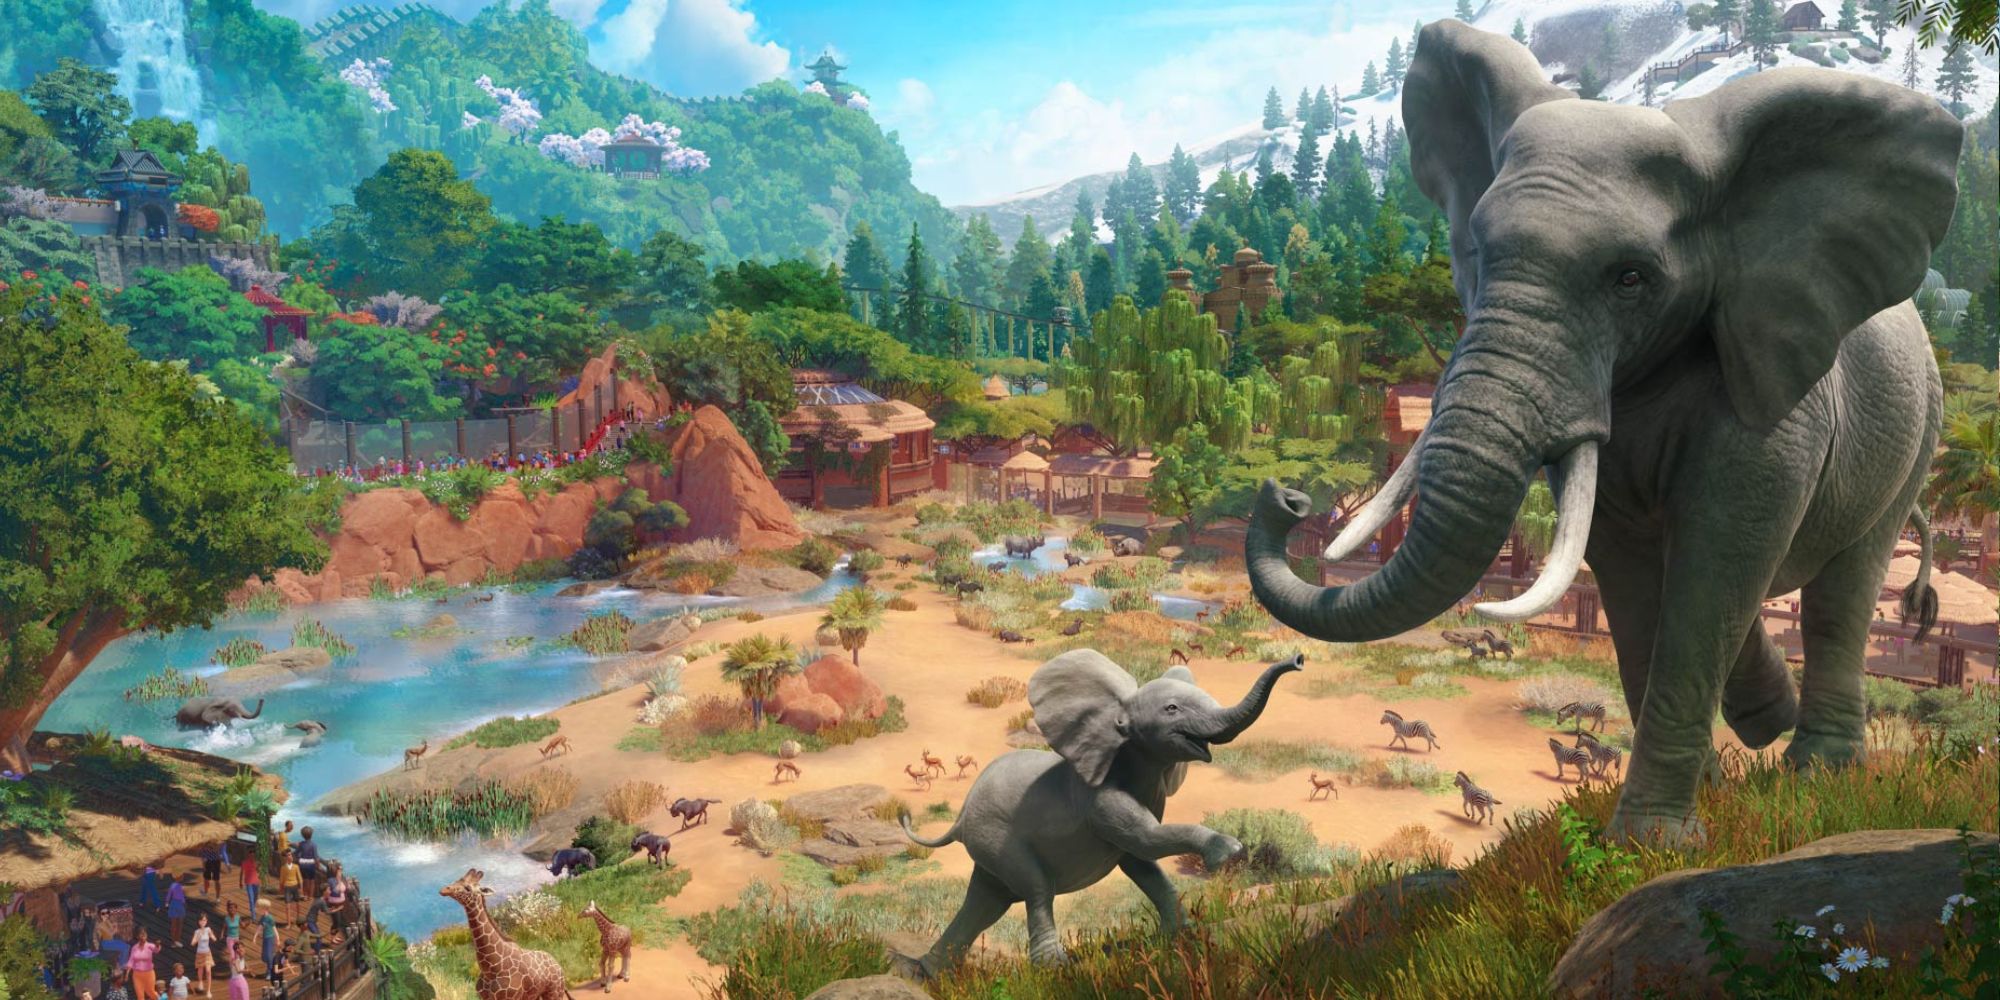 Planet Zoo Console Edition Official Artwork of two elephants against a background of a zoo